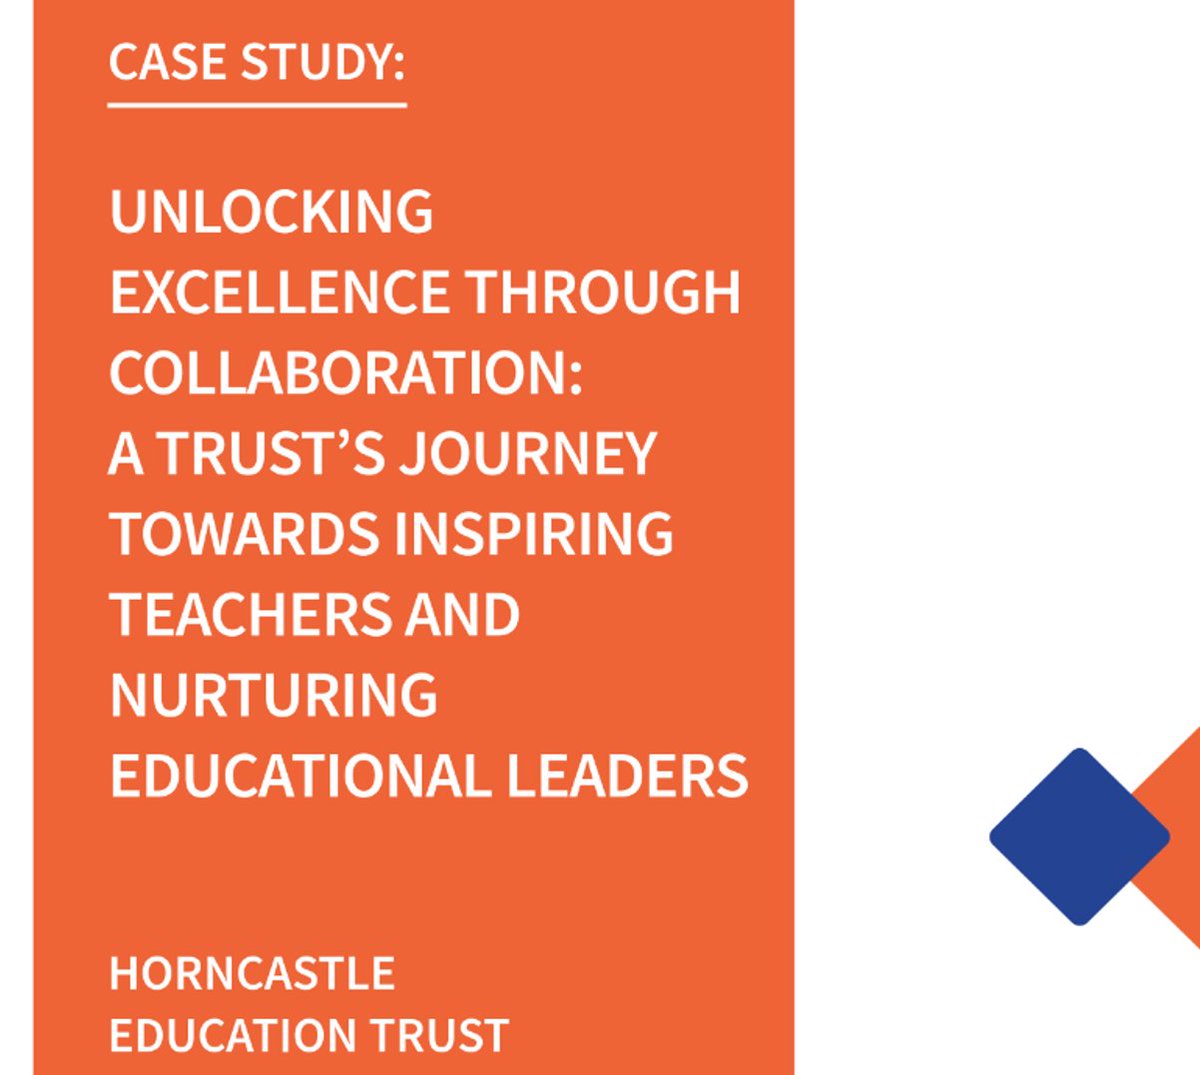 Exemplifying the Golden Thread in different contexts. @H_E_Trust View the DfE case study from the Horncastle Education Trust here: drive.google.com/file/d/13dBi8Q…